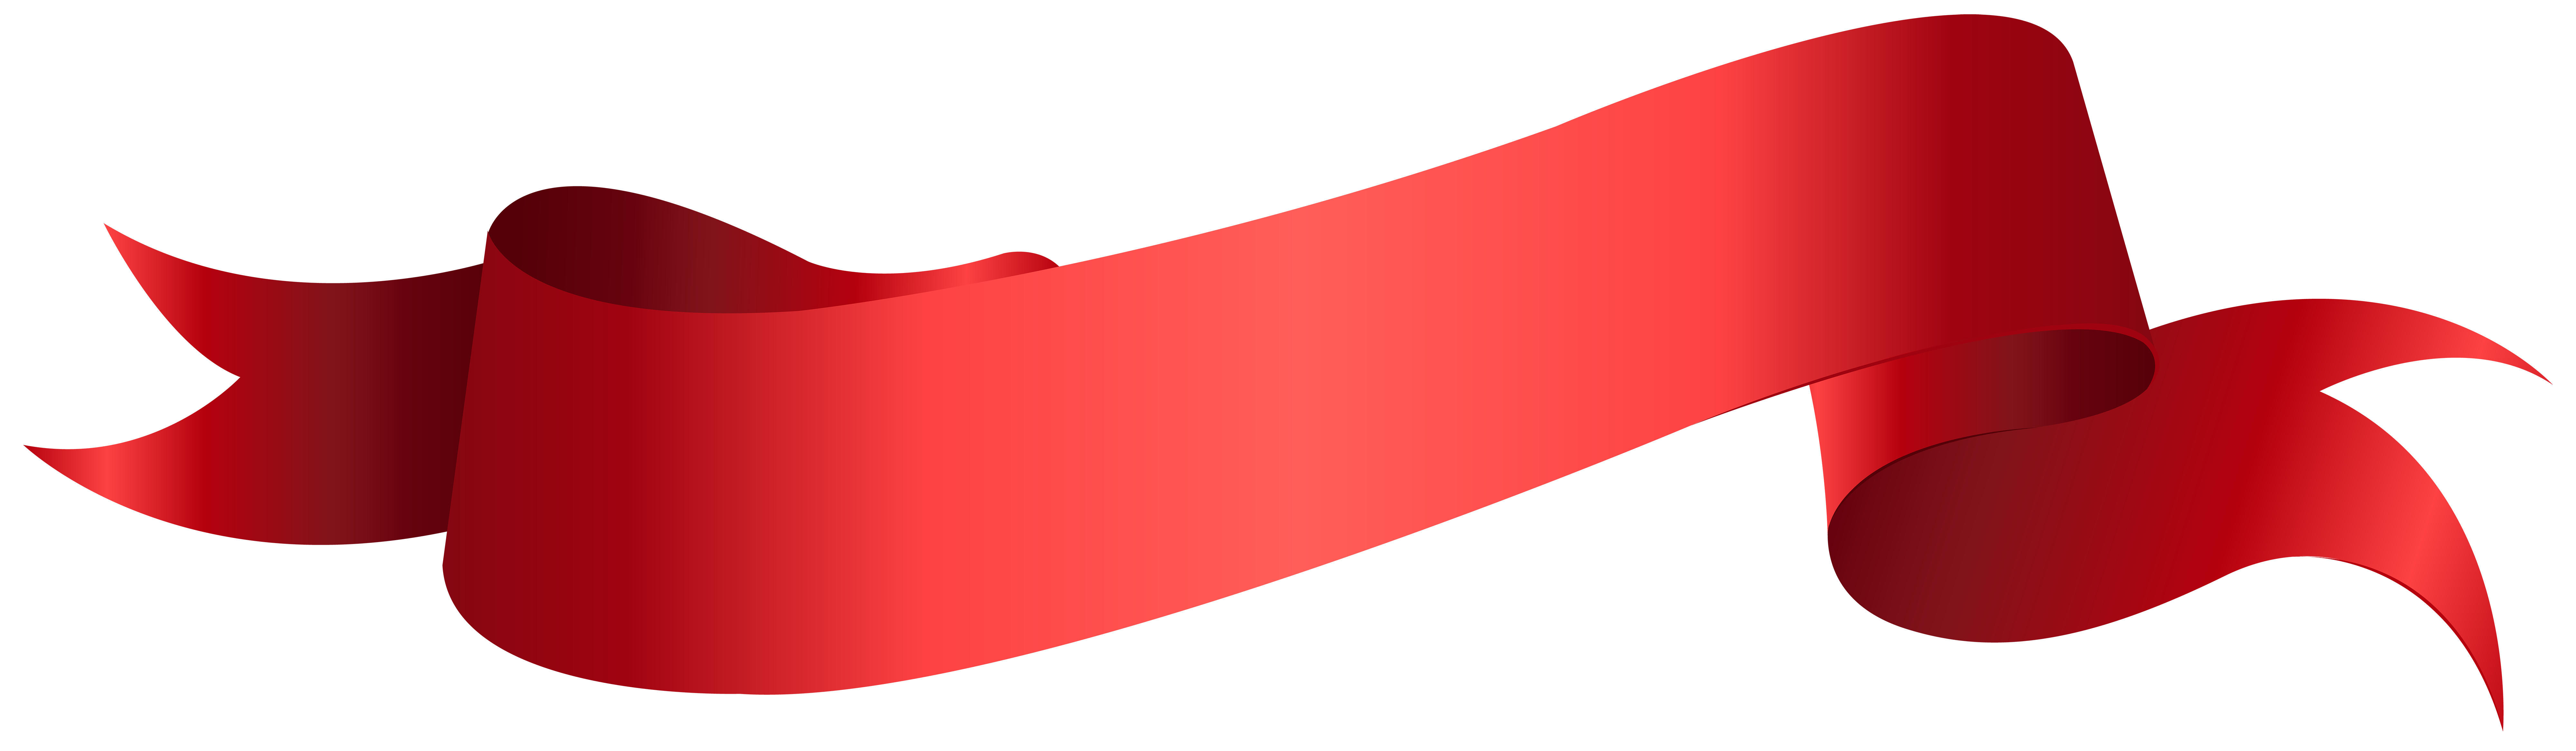 Banner red png.